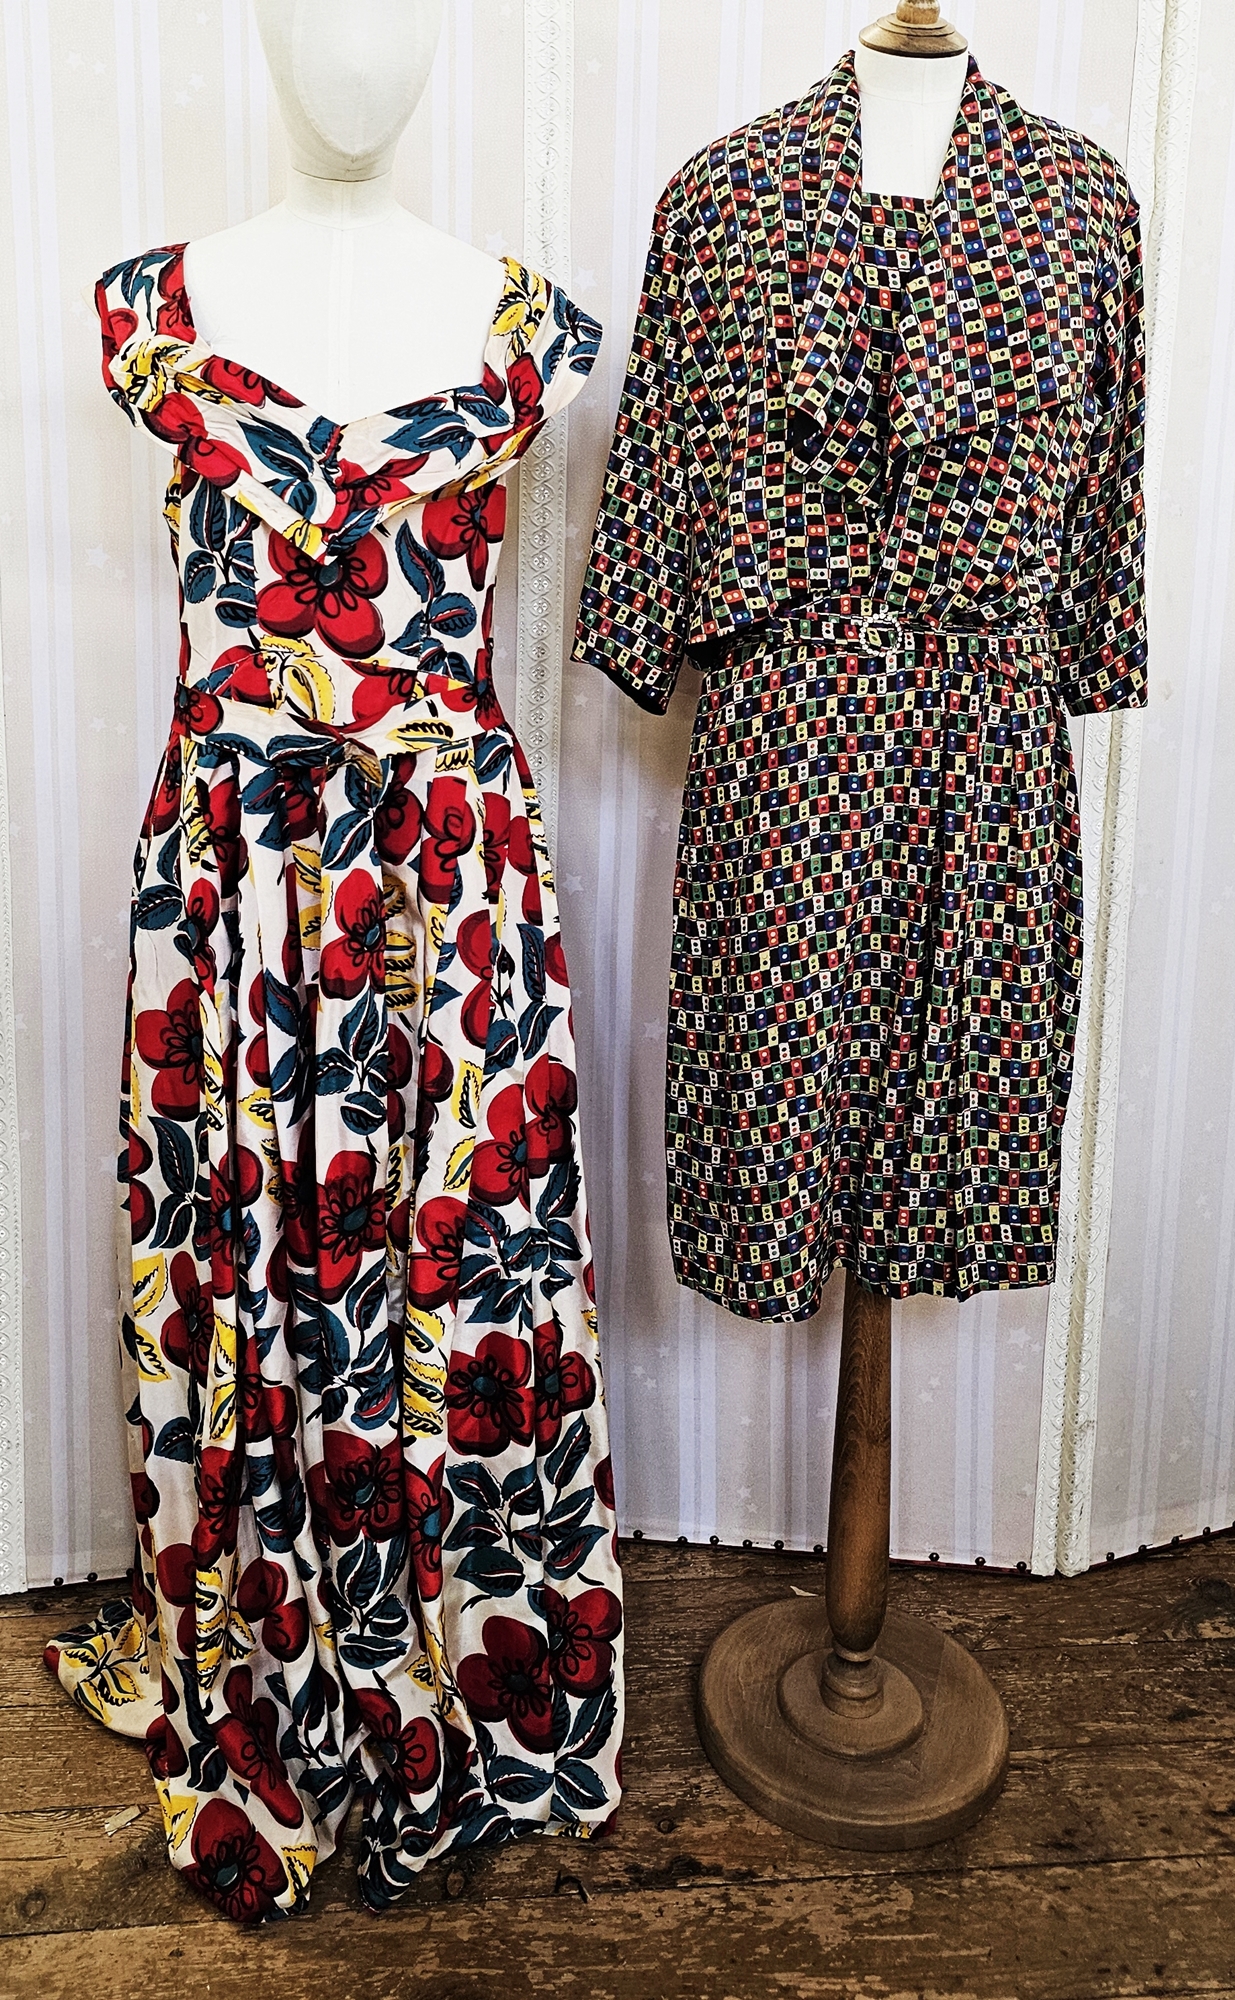 1930's - a full-length evening gown, bold pattern in red, turquoise and yellow, printed onto a white - Image 15 of 28